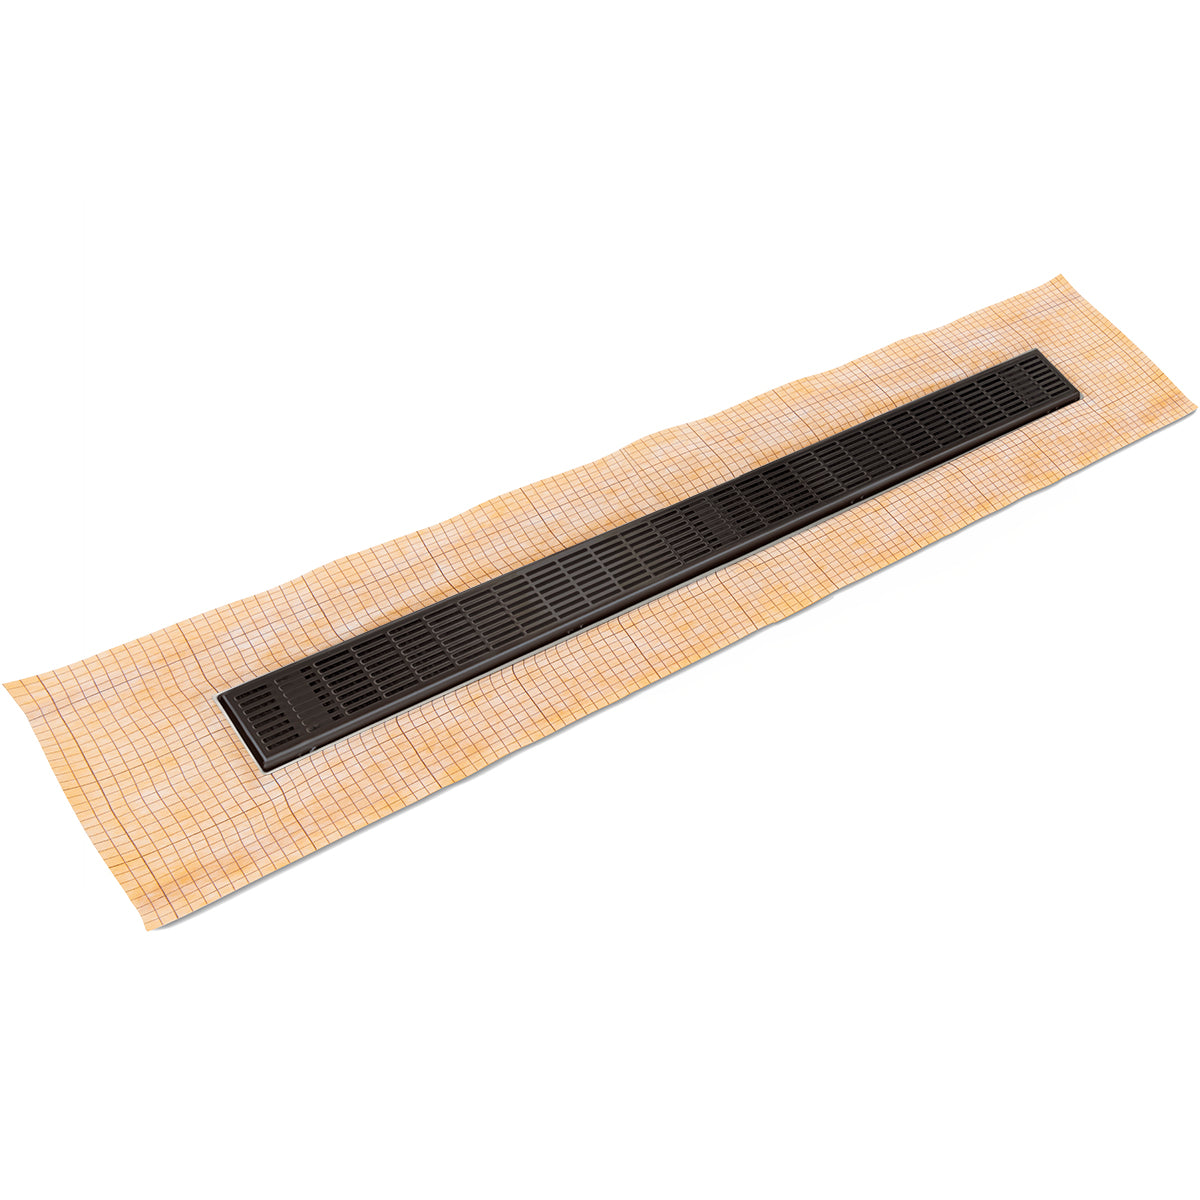 Infinity Drain 48" FCS Series Schluter-Kerdi - Fixed Flange Linear Drain Kit with 2 1/2" Perforated Slotted Grate